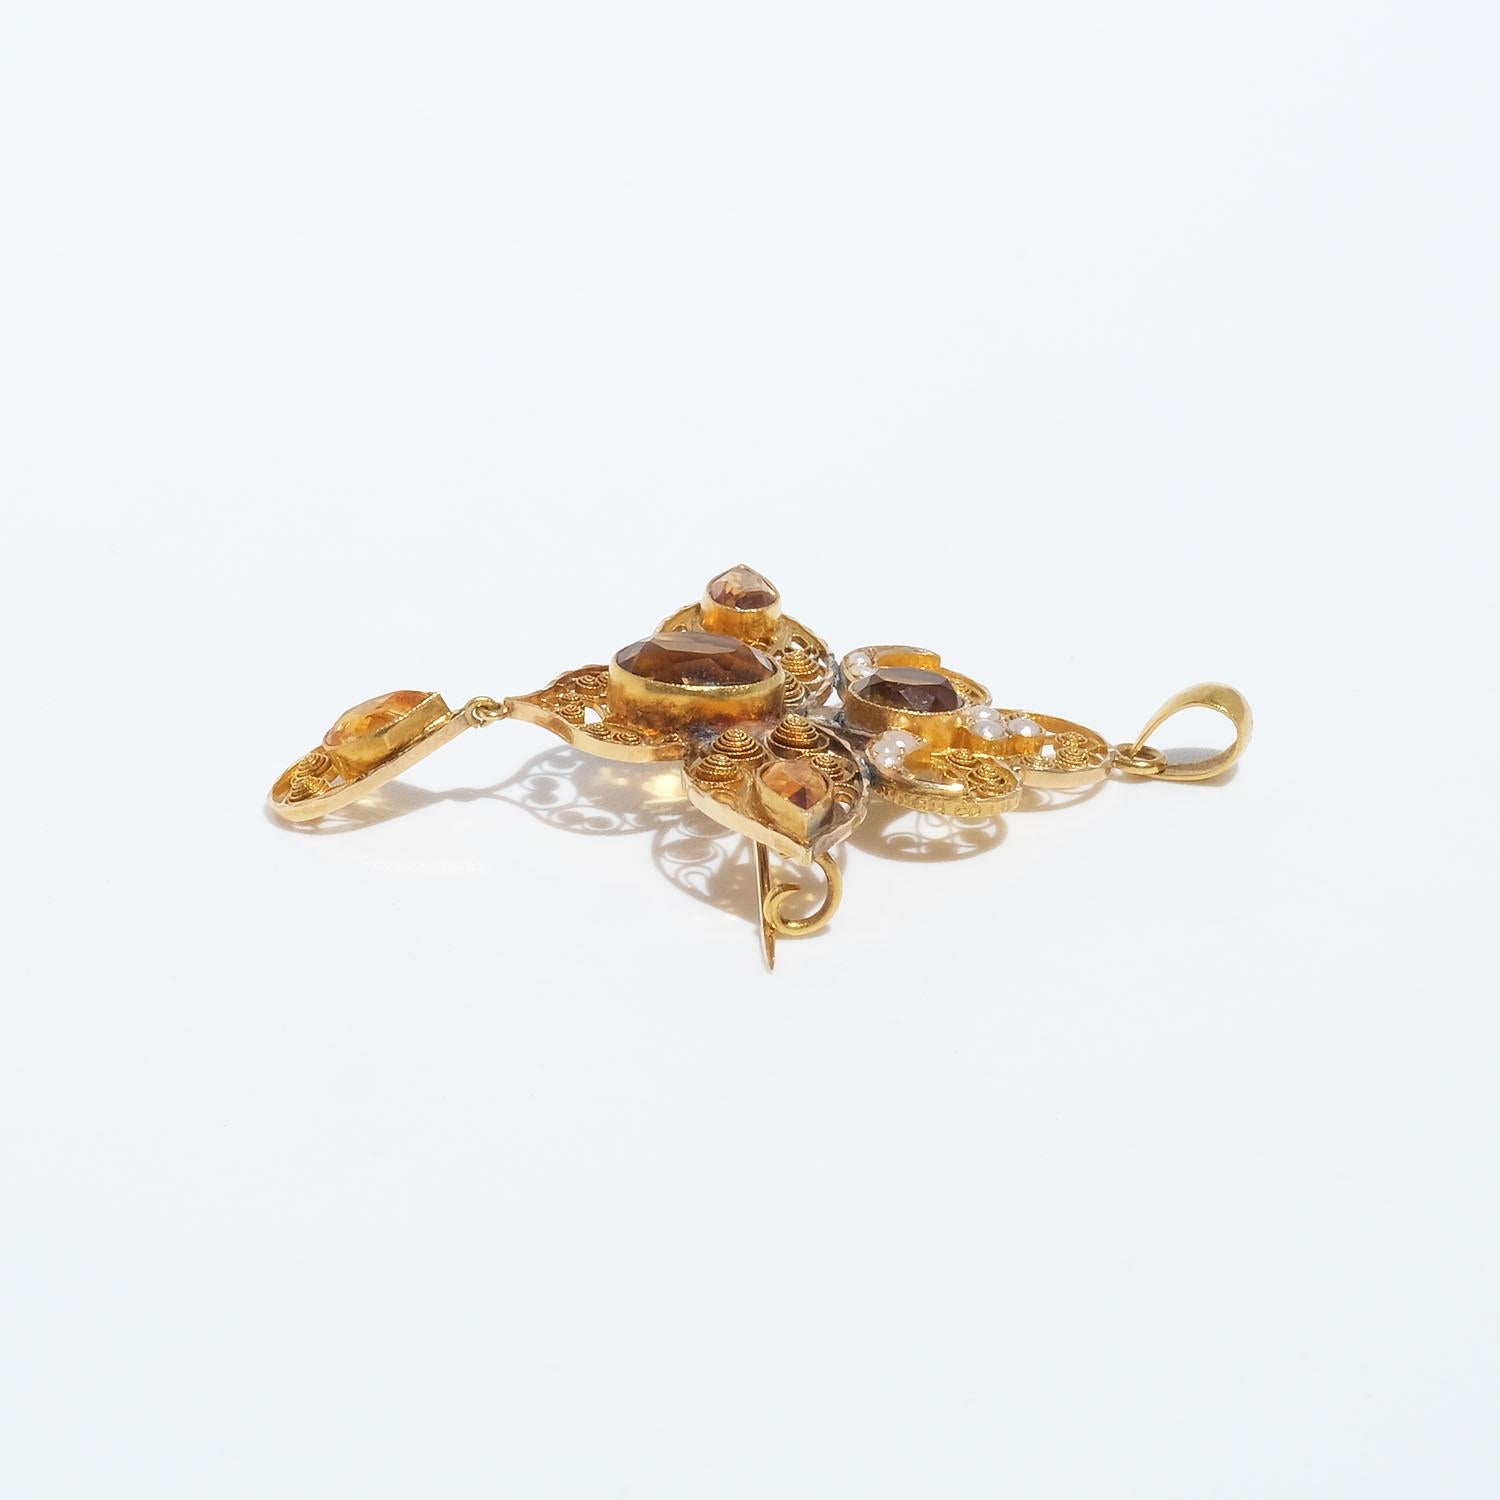 18k Gold, Citrine and Seed Bead Brooch/Pendant Made Year 1915 For Sale 2